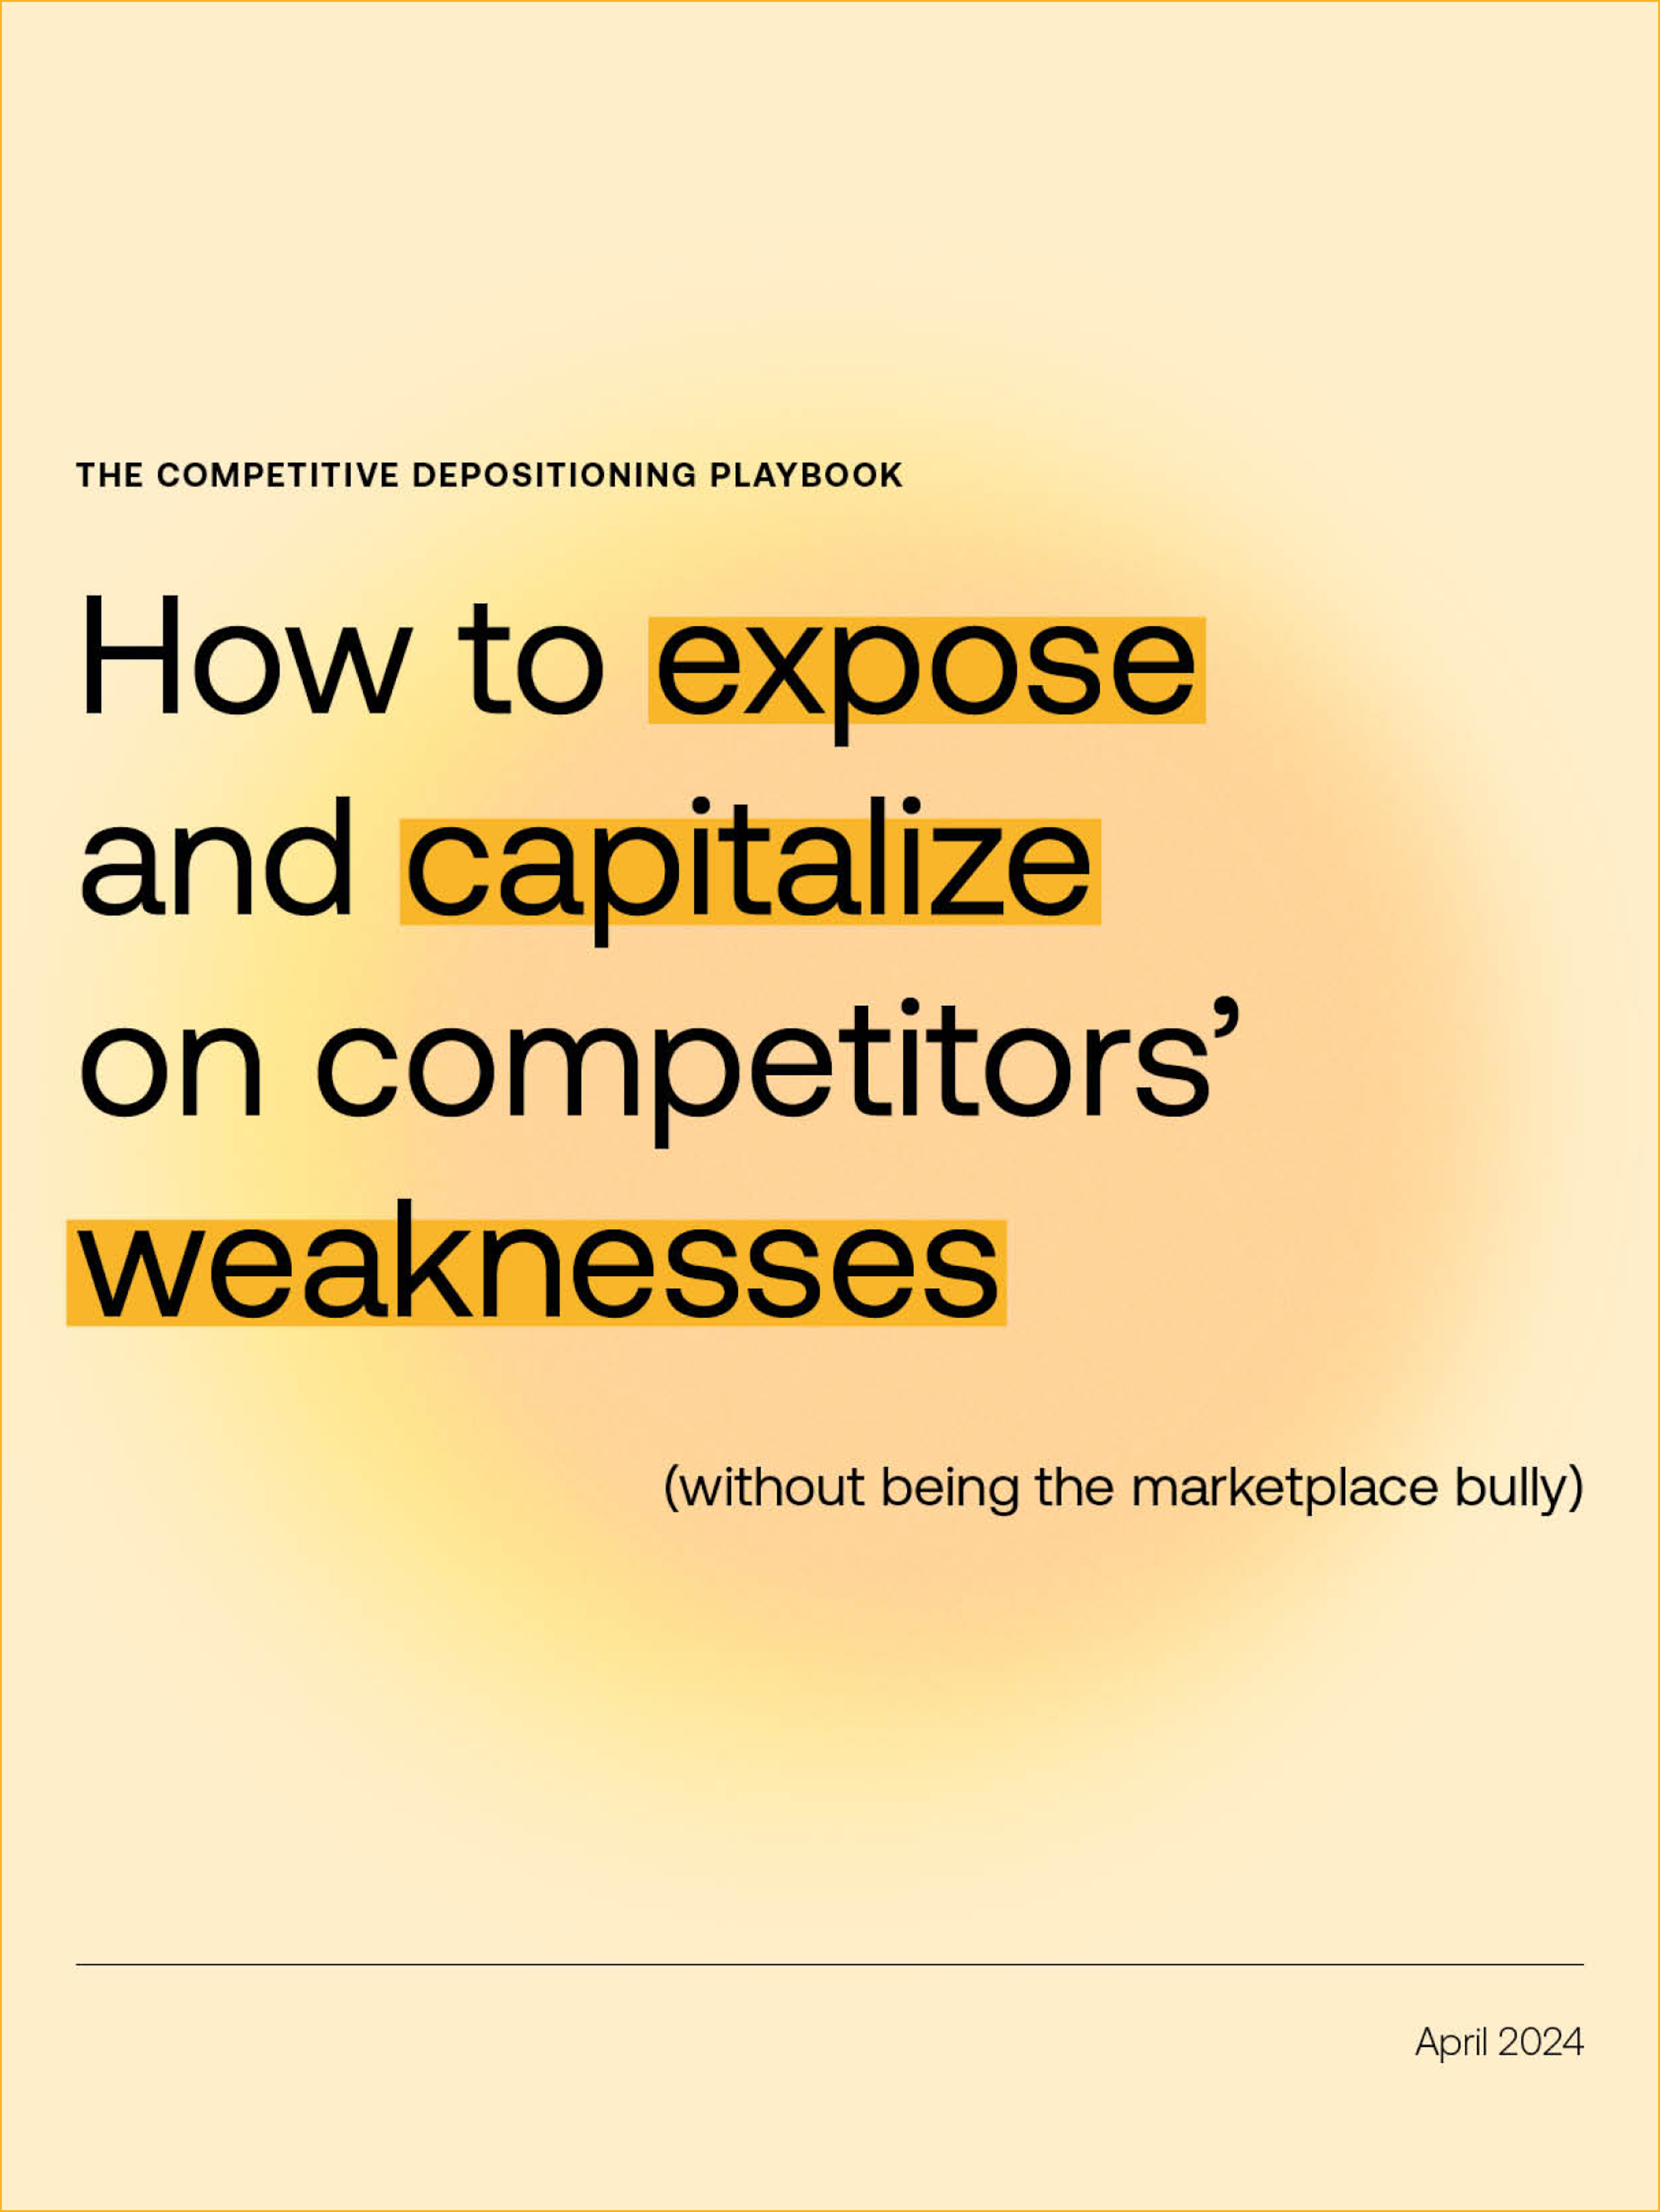 Thumbnail for playbook on How to expose and capitalize on competitors’ weaknesses